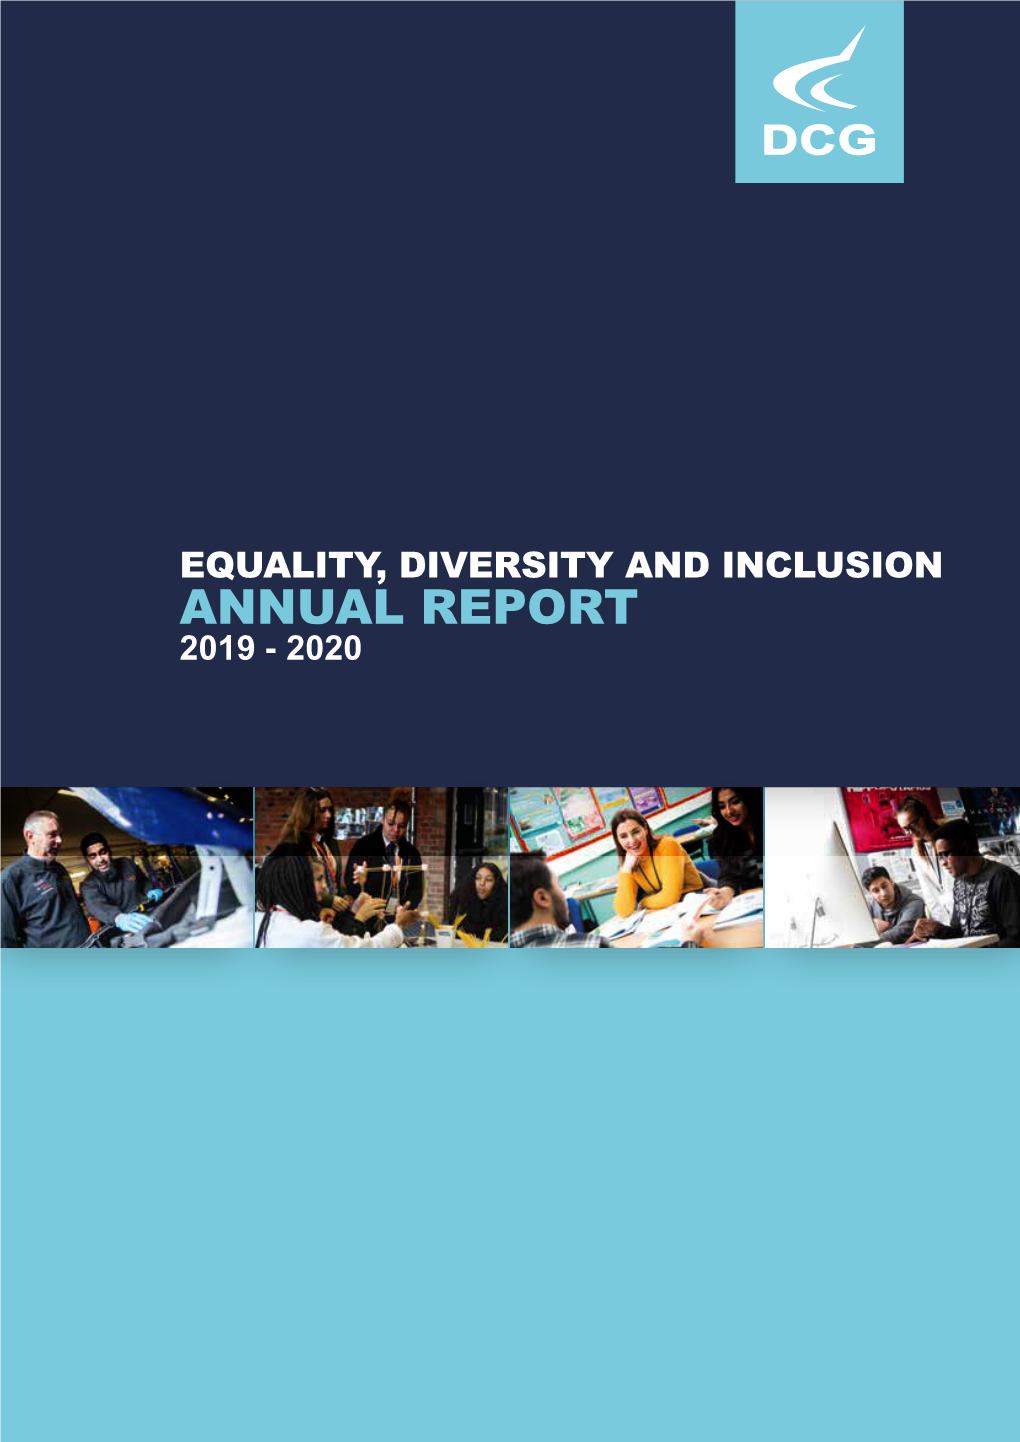 Equality, Diversity and Inclusion Annual Report 2019 - 2020